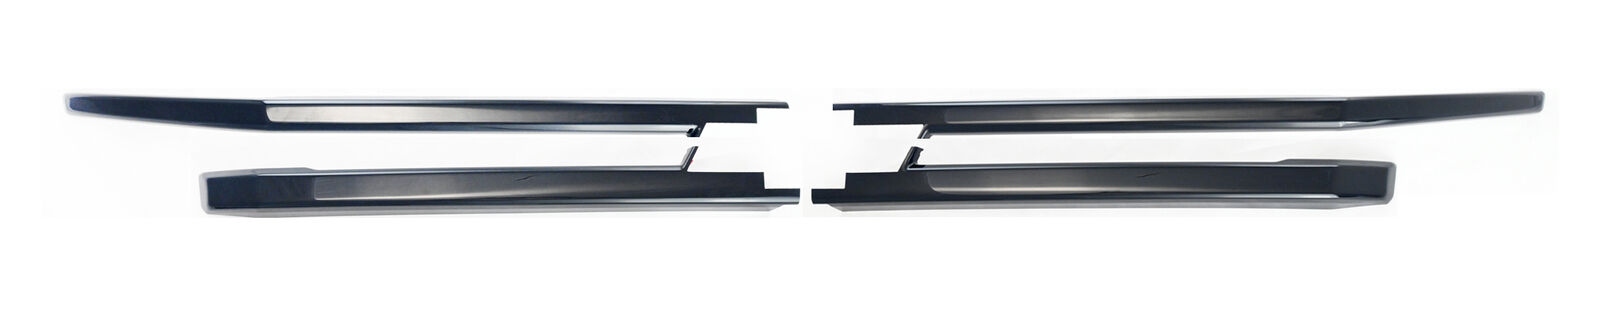 Gloss Black Tape-on Grille Overlay Insert Fits 21-24 Chevy Suburban/Tahoe